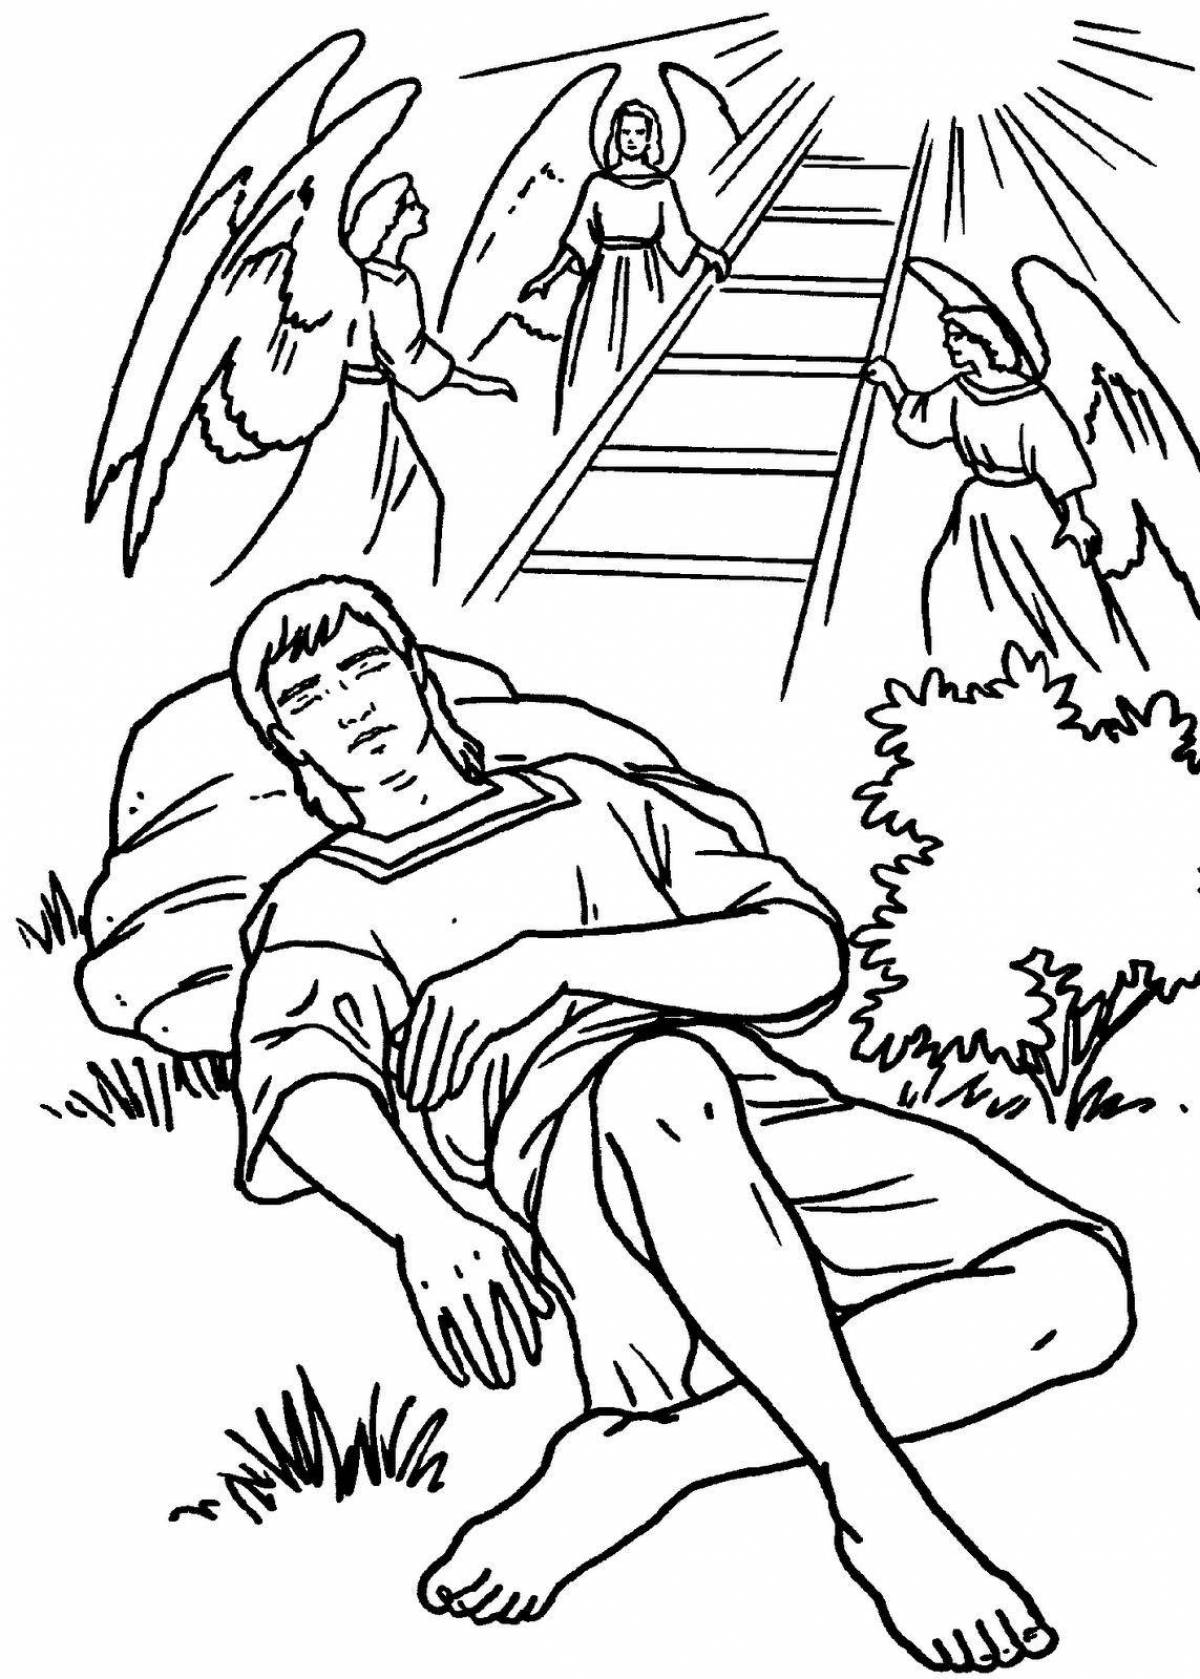 Animated Esau and Jacob coloring book